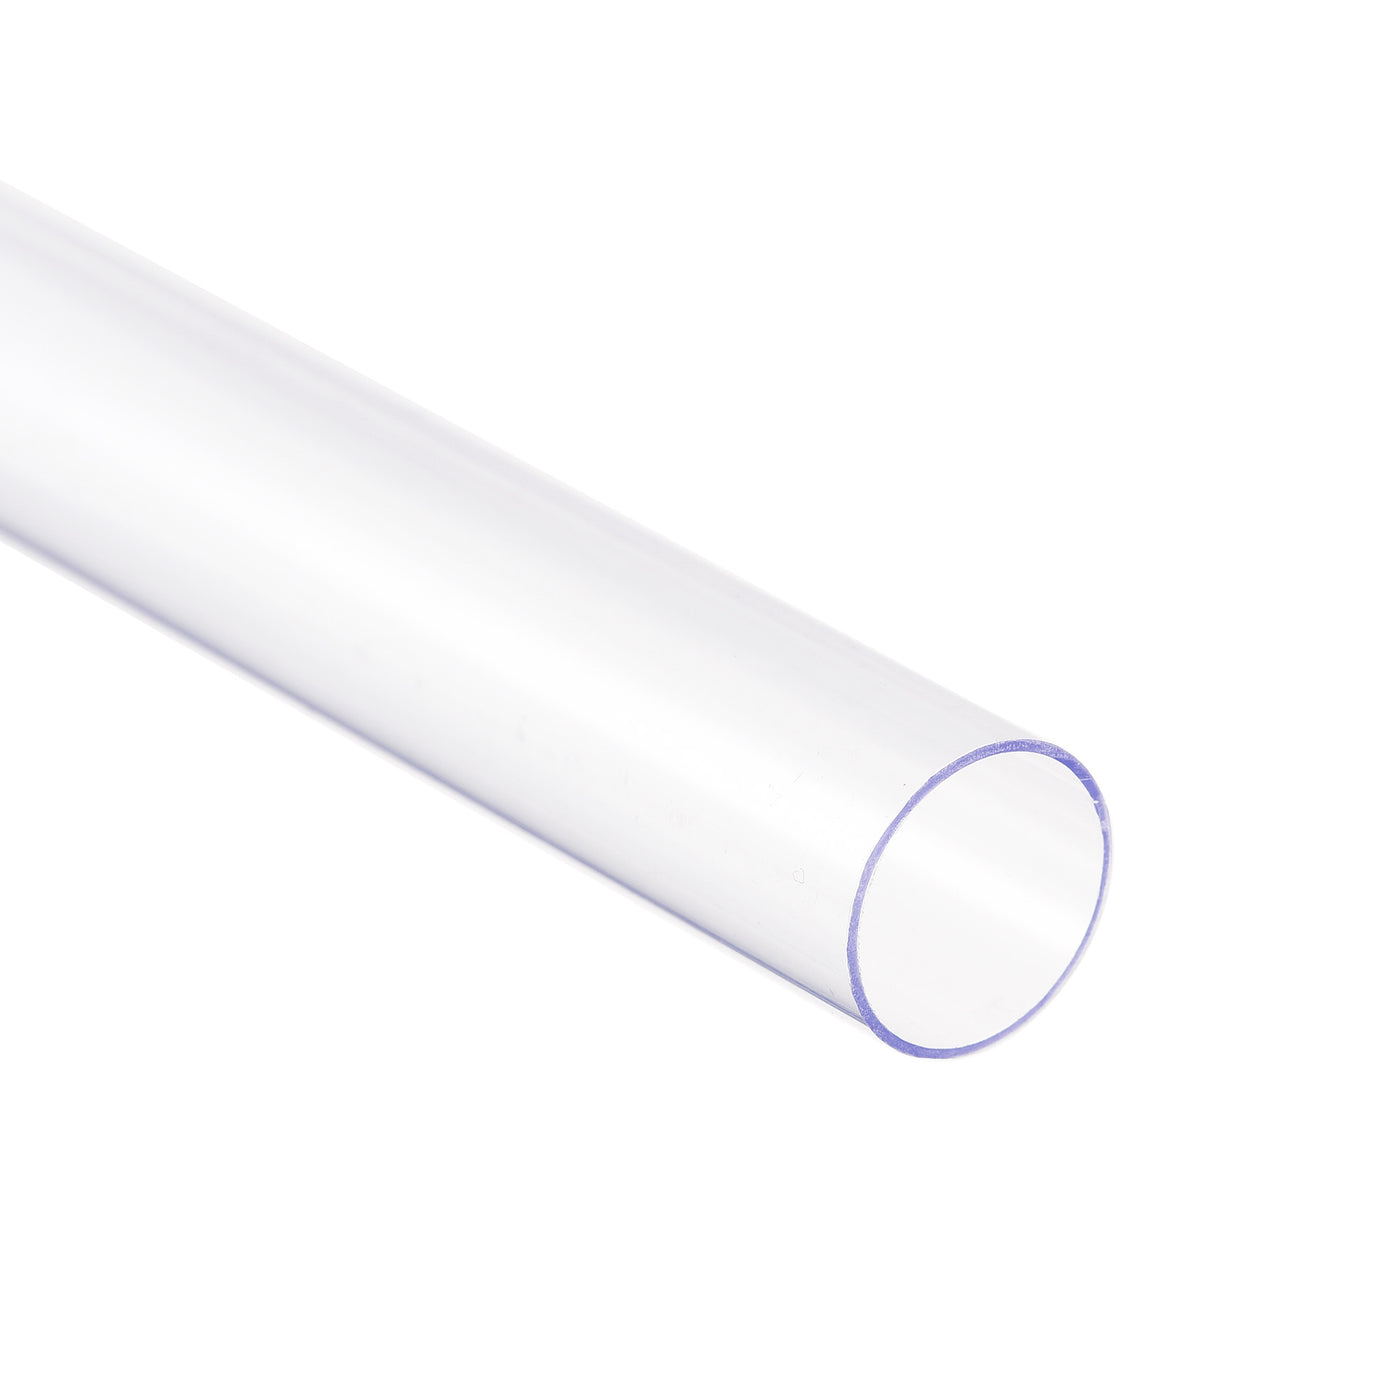 Uxcell Uxcell Polycarbonate Rigid Round Clear Tubing 20mm(0.78 Inch)IDx21mm(0.82 Inch)ODx500mm(1.64Ft) Length Plastic Tube 2pcs